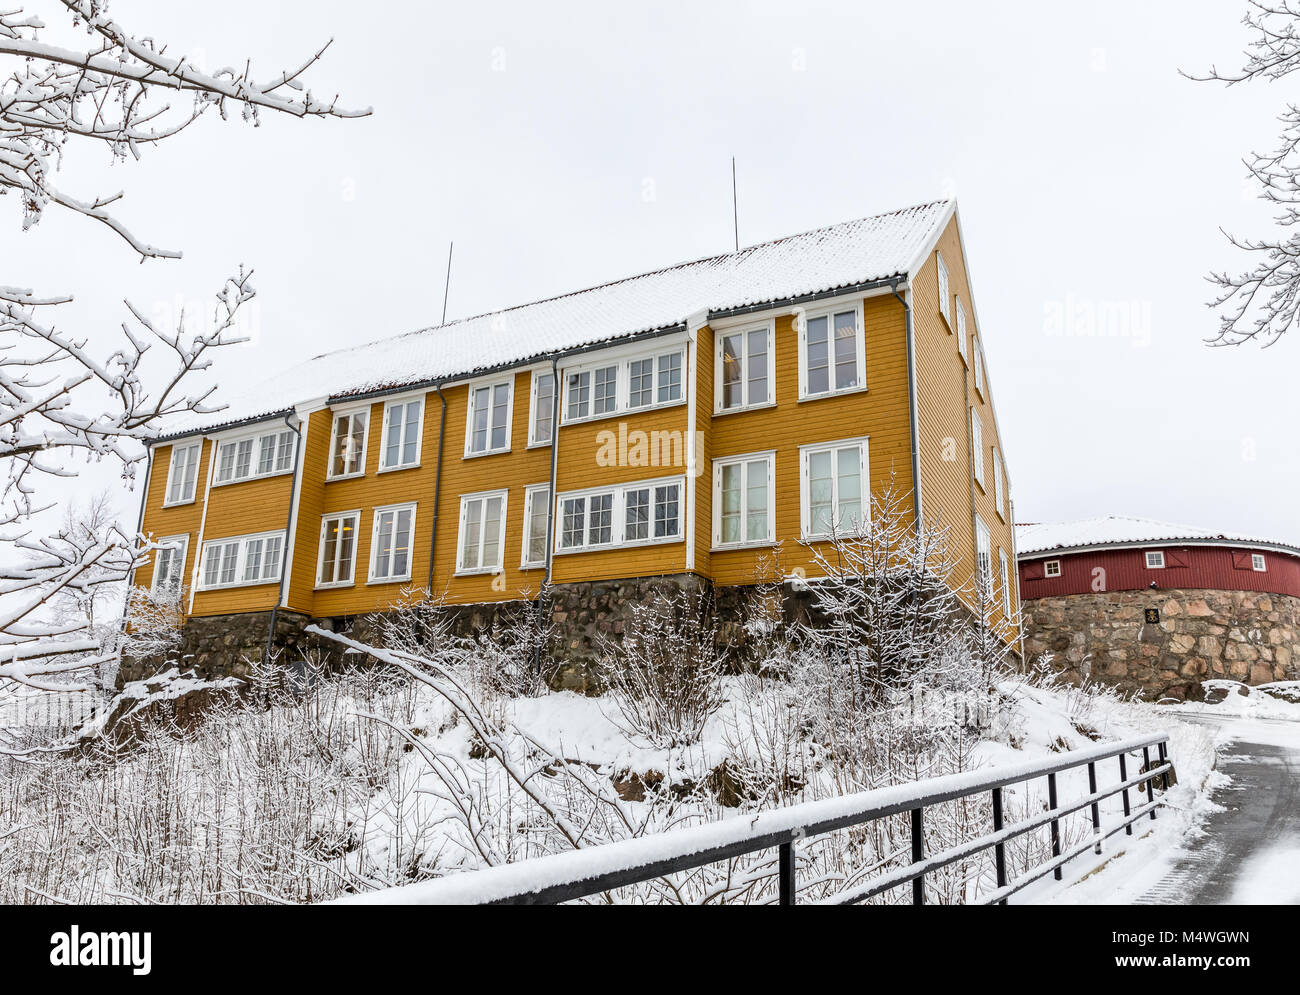 Odderoya in Kristiansand, Norway - January 17, 2018: Lasarettet, old yellow building from 1804, buildt as a quariantine to prevent spread cholera disease. Picture taken in winter, snow on the ground. Stock Photo